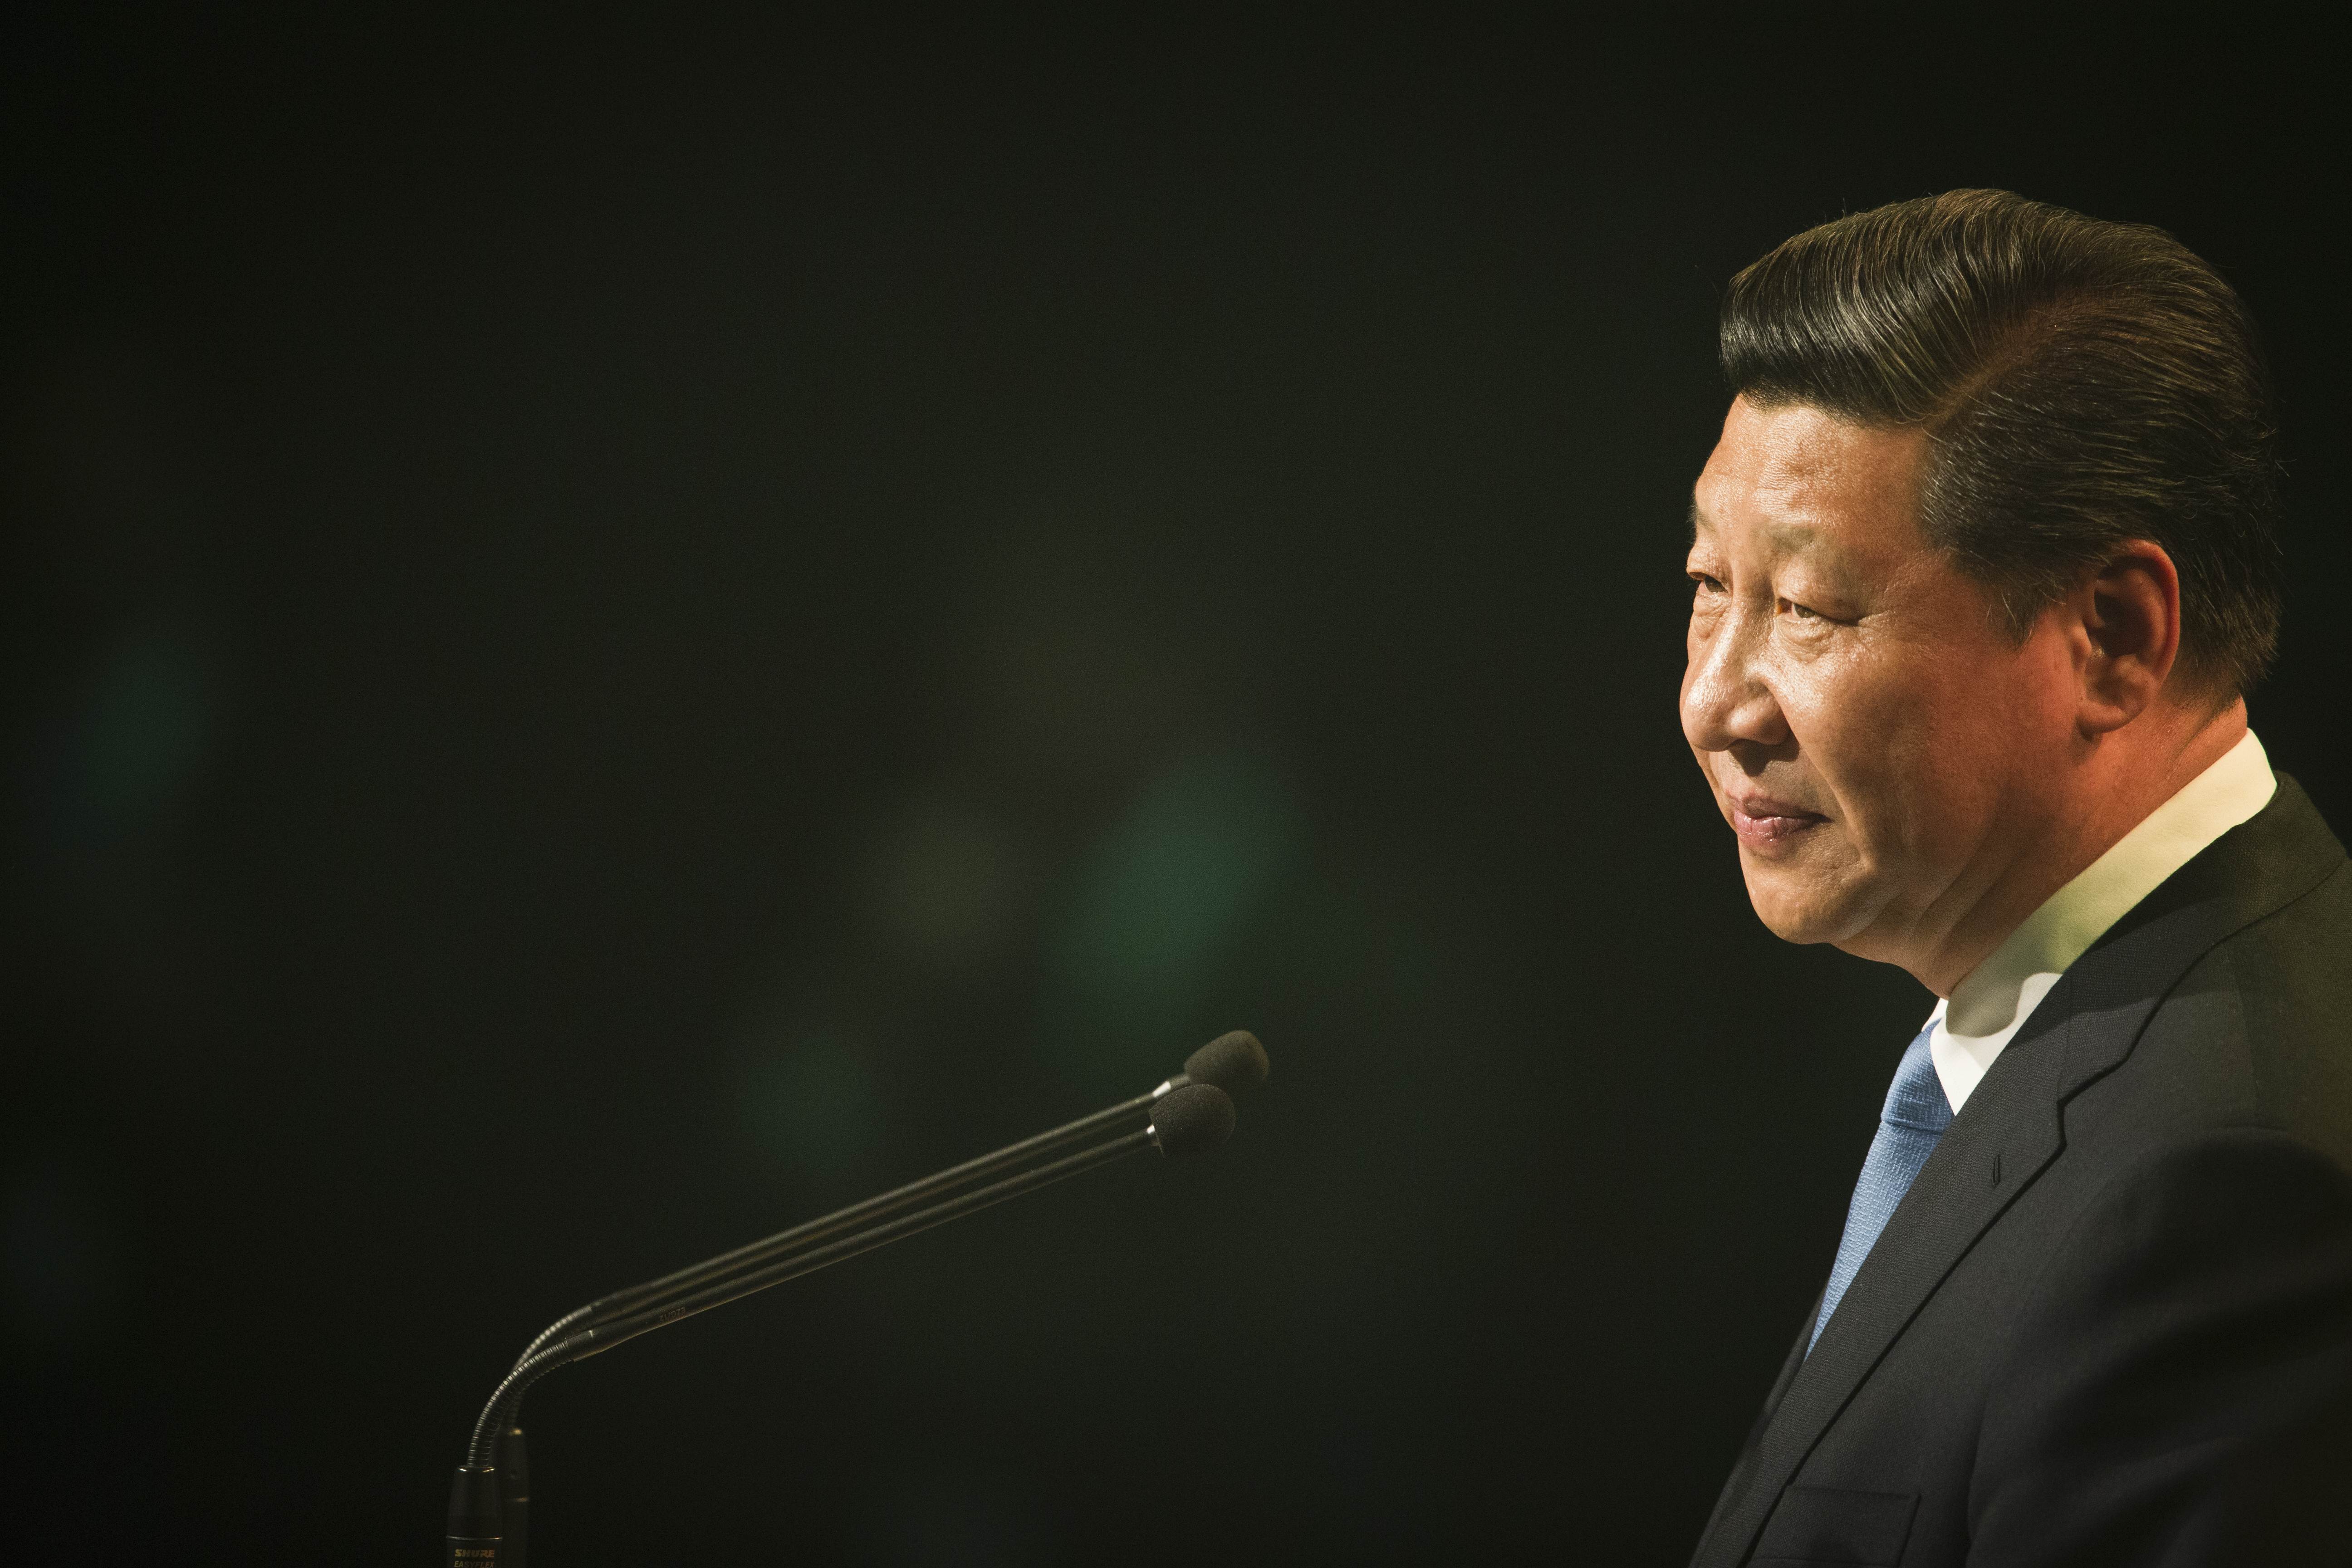 President Xi Jinping has been praised by Zhang Quanjing, the Communist Party's former personnel chief, for promoting Mao's thinking since he came to power. Photo: AFP